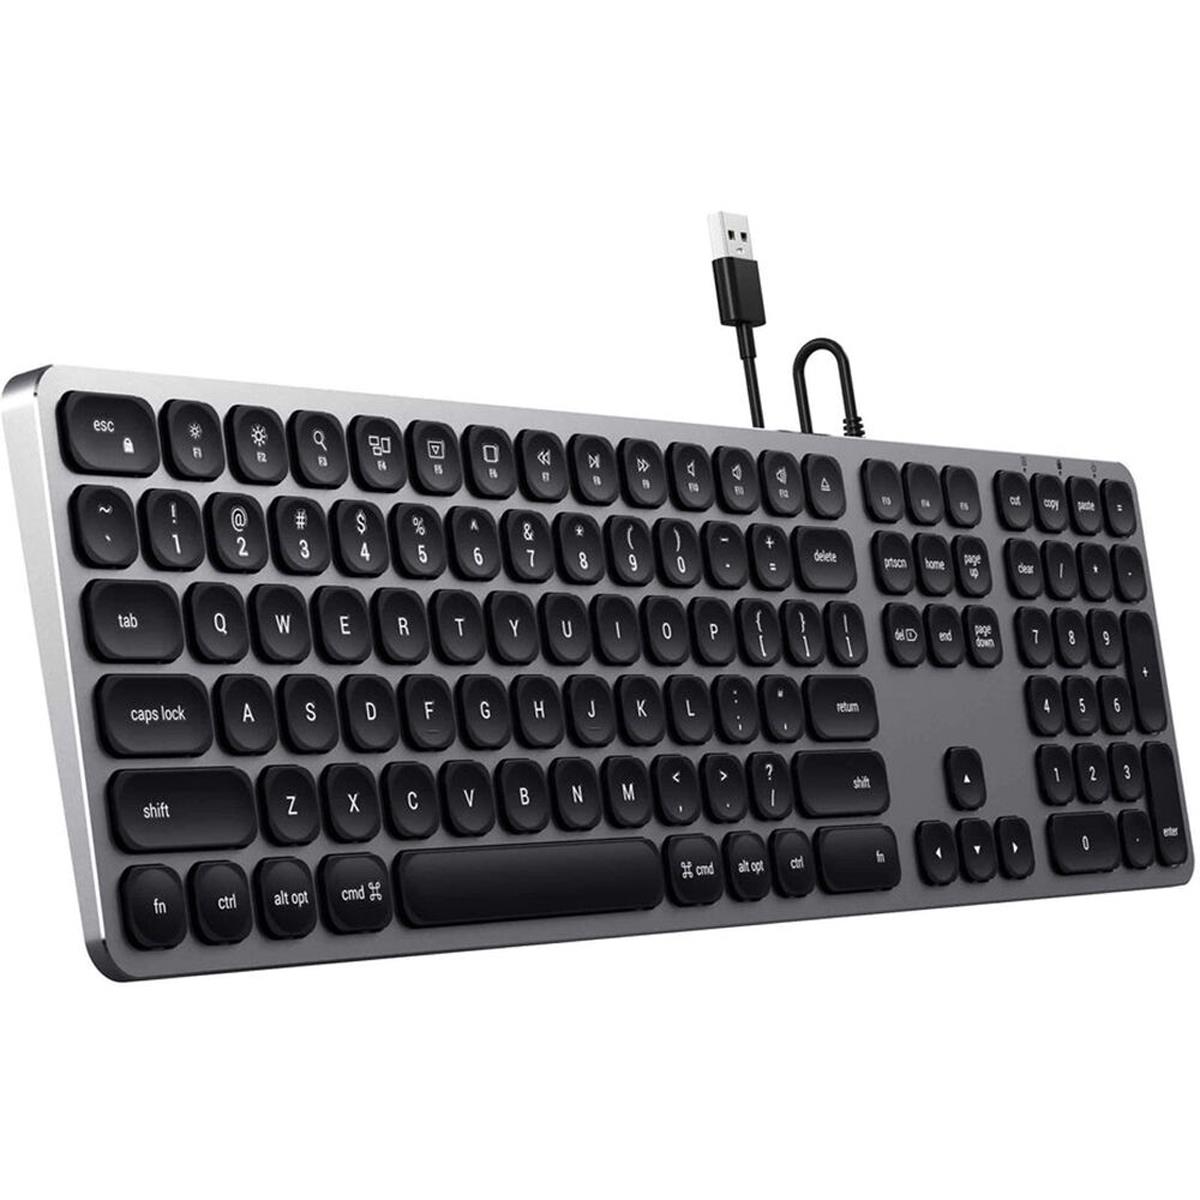 Image of Satechi Aluminum Wired USB Keyboard for Apple Mac